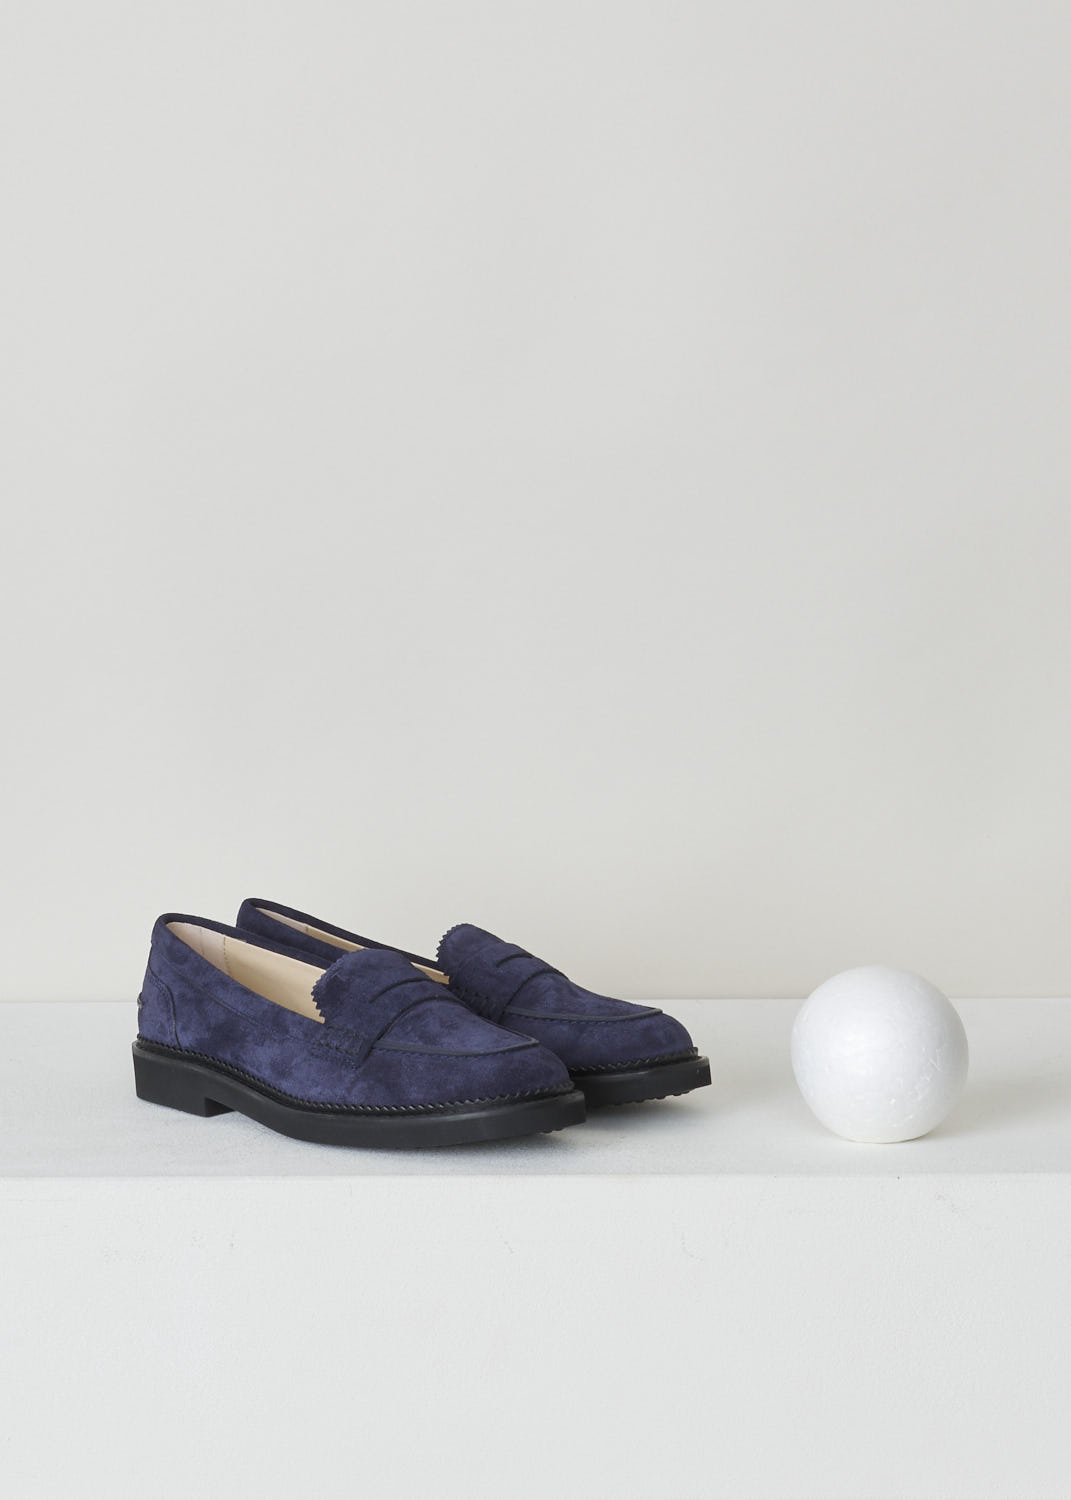 TODS, BLUE SUEDE PENNY LOAFERS, XXW76B0BP10RE0U824, Blue, Front, These blue suede slip-on penny loafers have a rounded toe and a decorative slotted leather strip over the upper side. The upper side being decorated with serrated edges. These loafers have black soles. 
